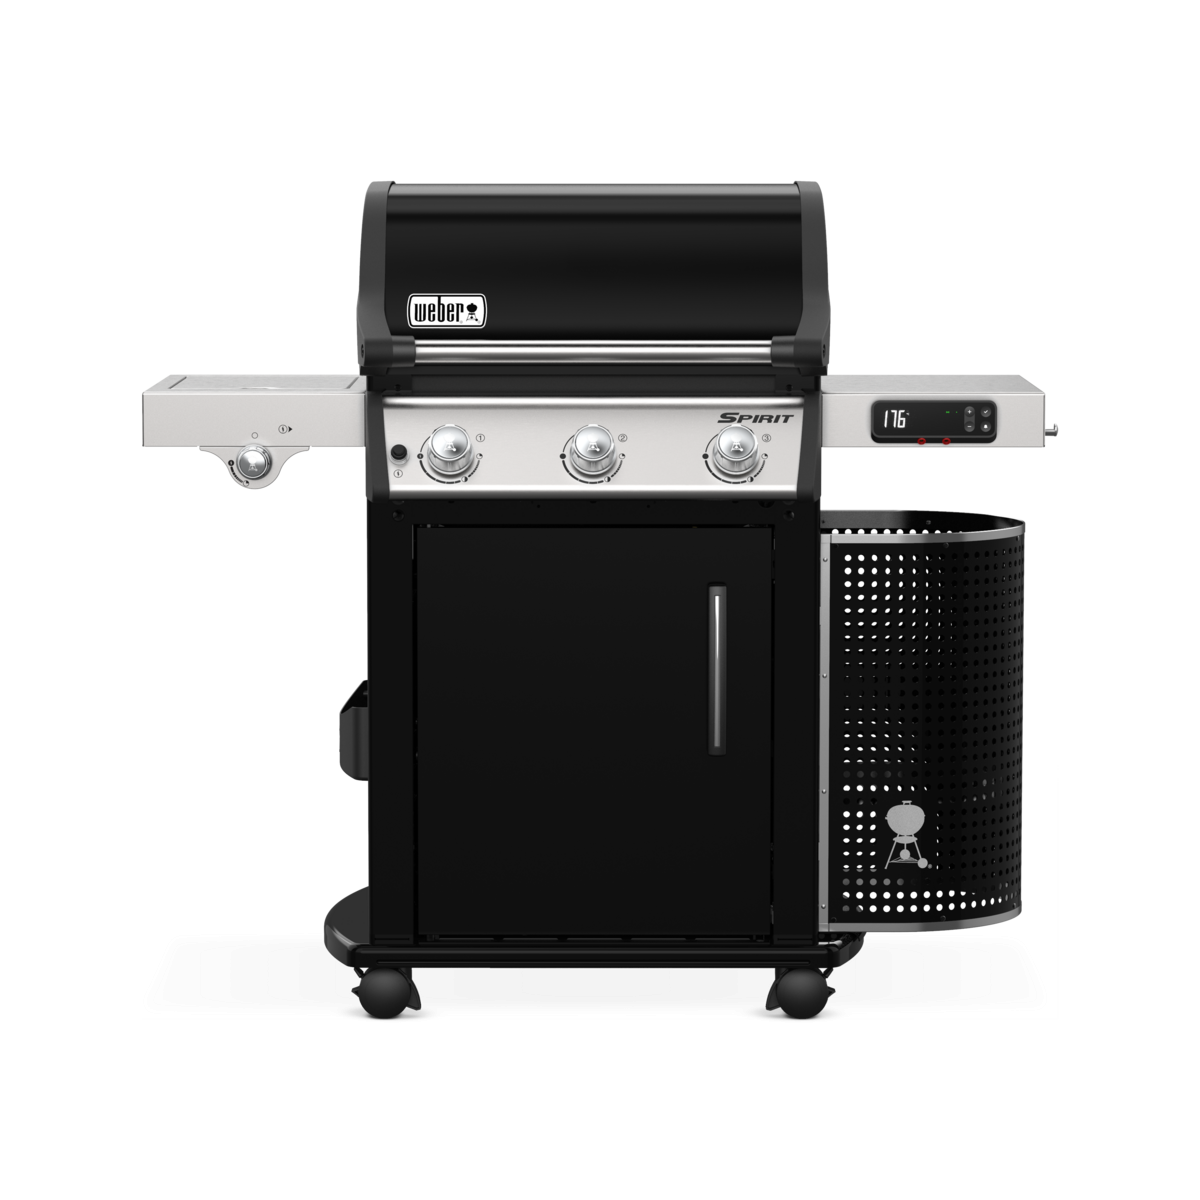 WEBER gas grill SPIRIT EPX-325 GBS, 46713775